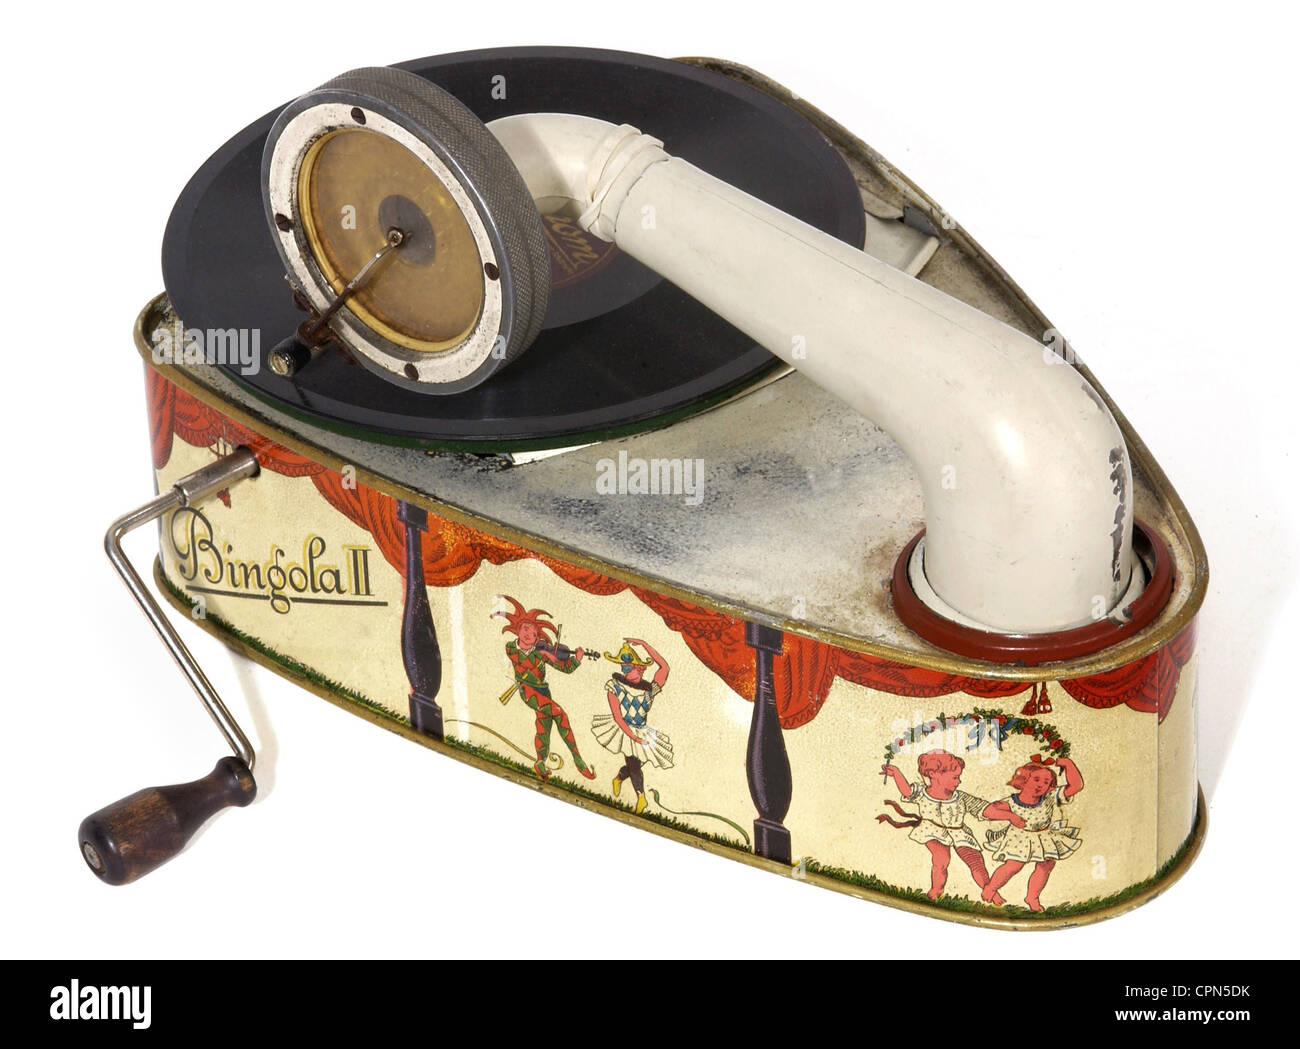 toys, gramophone for children, Bingola II, made by company Bing, Nuremberg, mostly used for the play-back of nursery rhymes and fairytales, metal housing, Germany, circa 1926, Additional-Rights-Clearences-Not Available Stock Photo